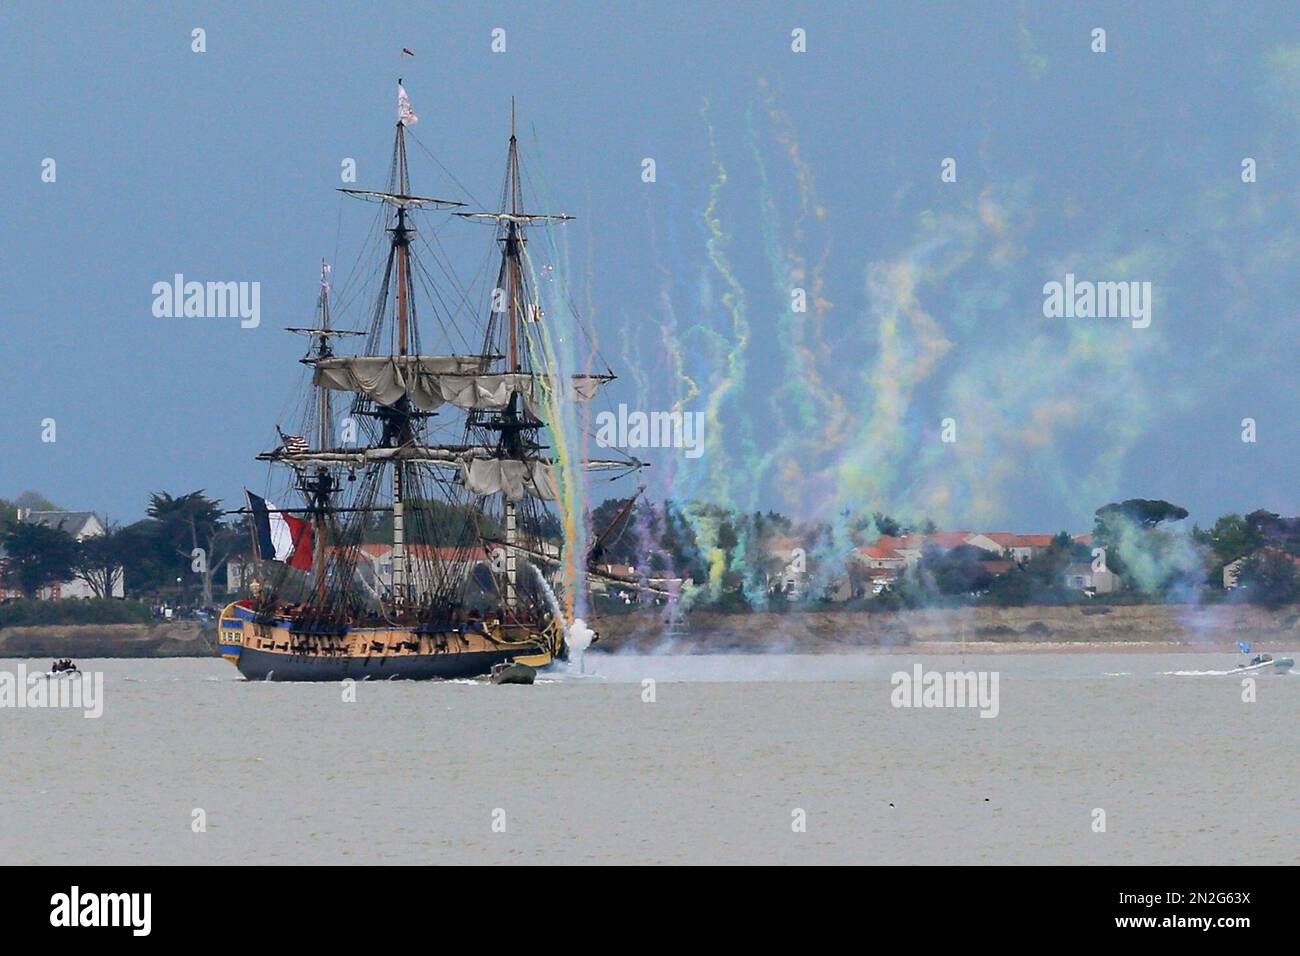 Fireworks crackle around the replica of the frigate Hermione, used to bring  French troops and funds to American revolutionaries in 1780, sails near  Fouras, southwest France, on his way for its transatlantic